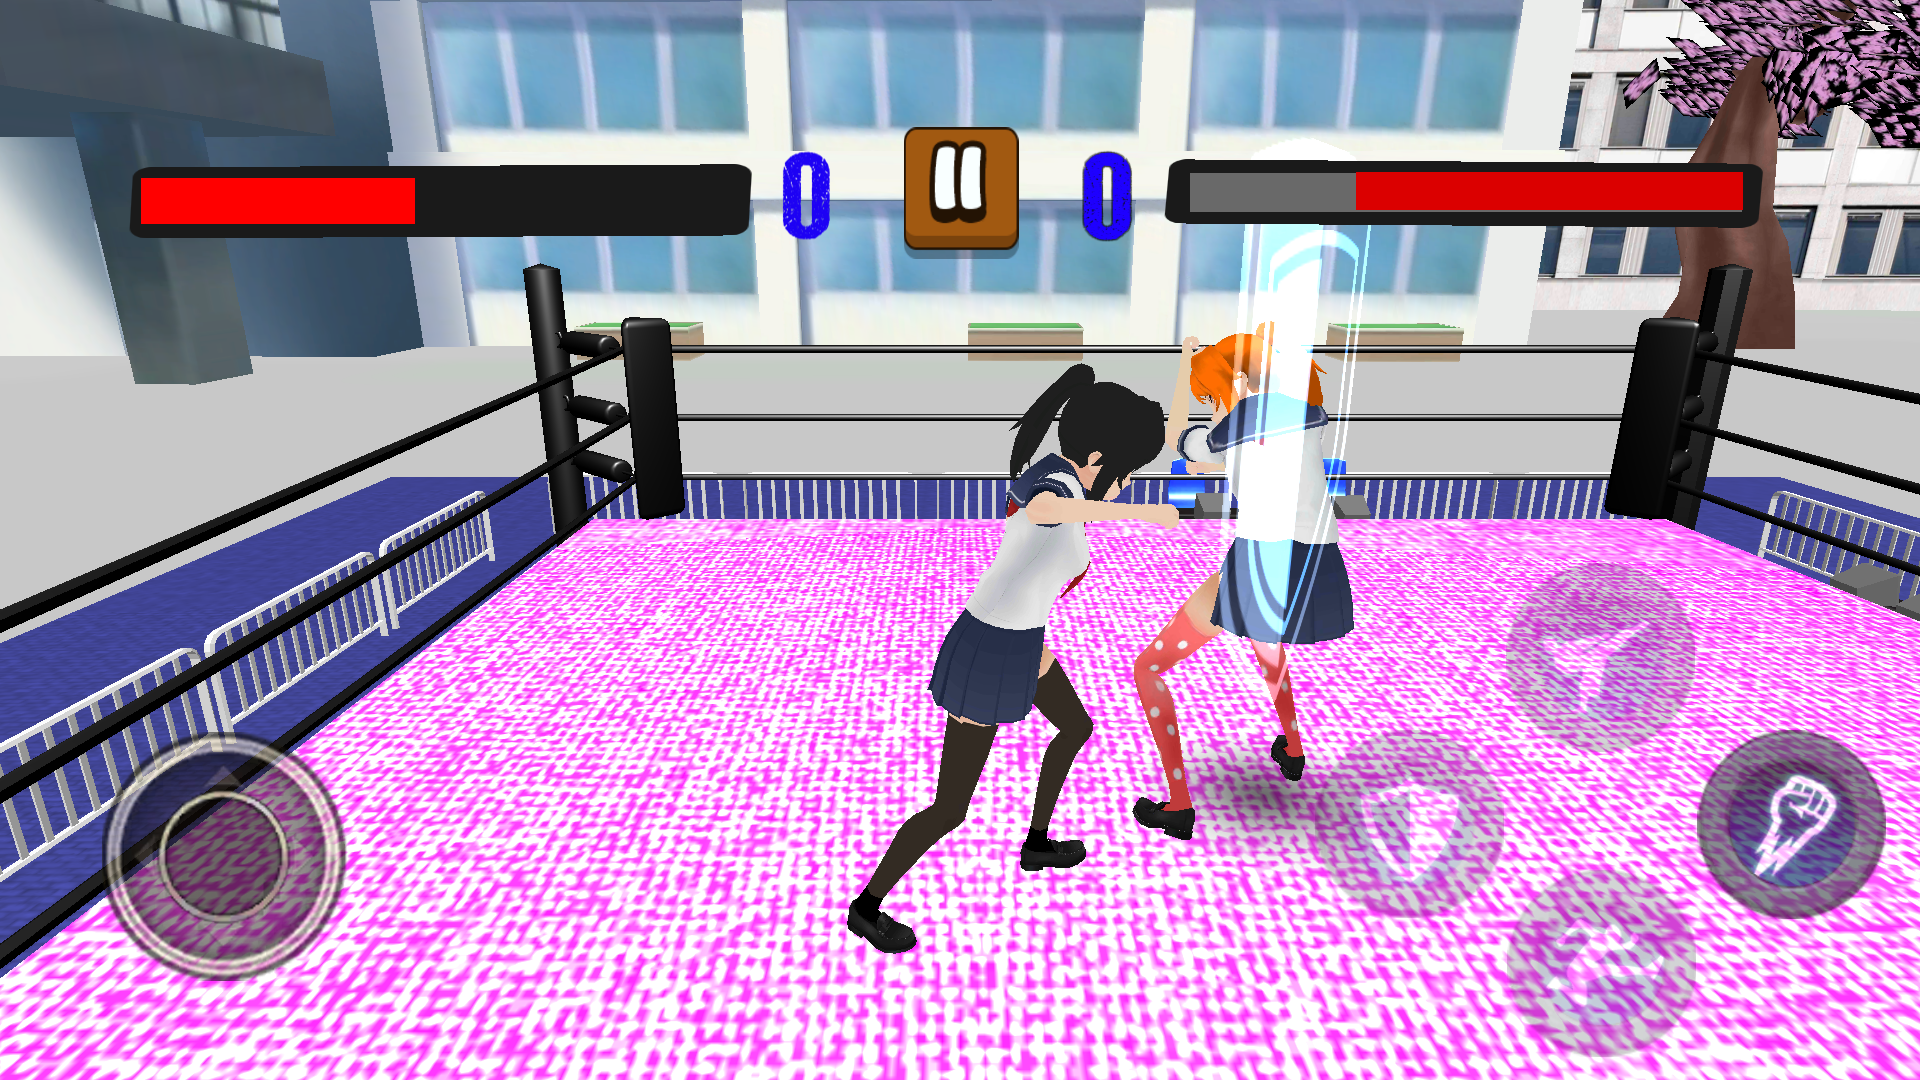 Yandere Fight unity project